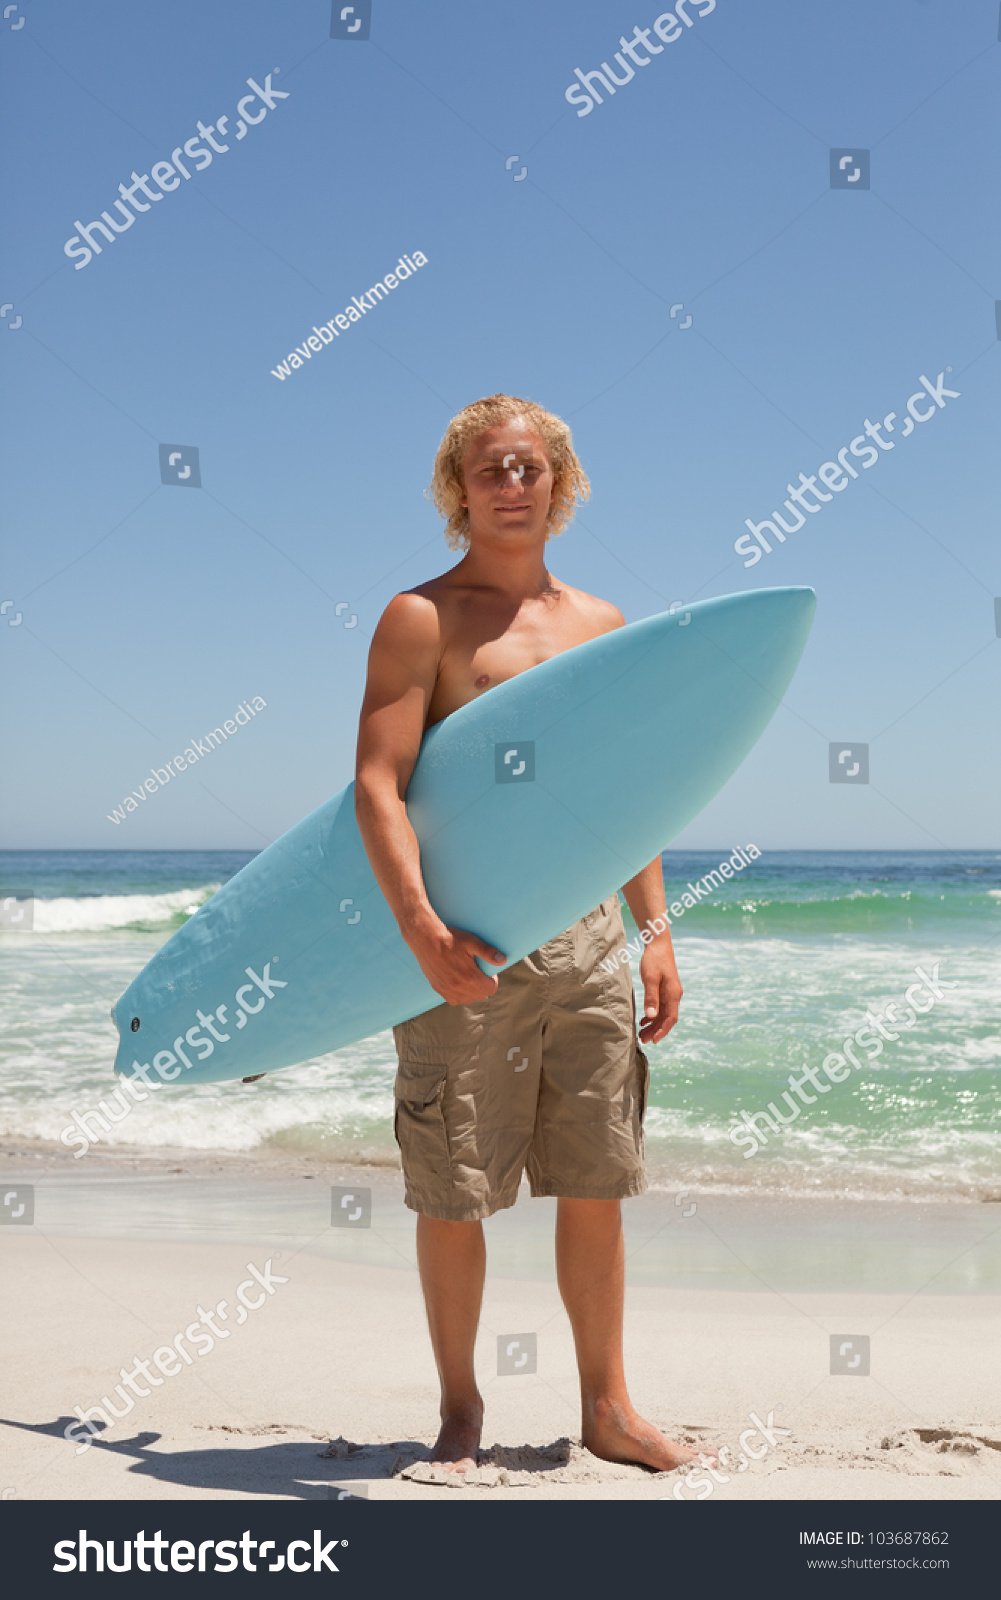 Blonde Man Holding His Blue Surfboard While Standing On The Beach Stock ...